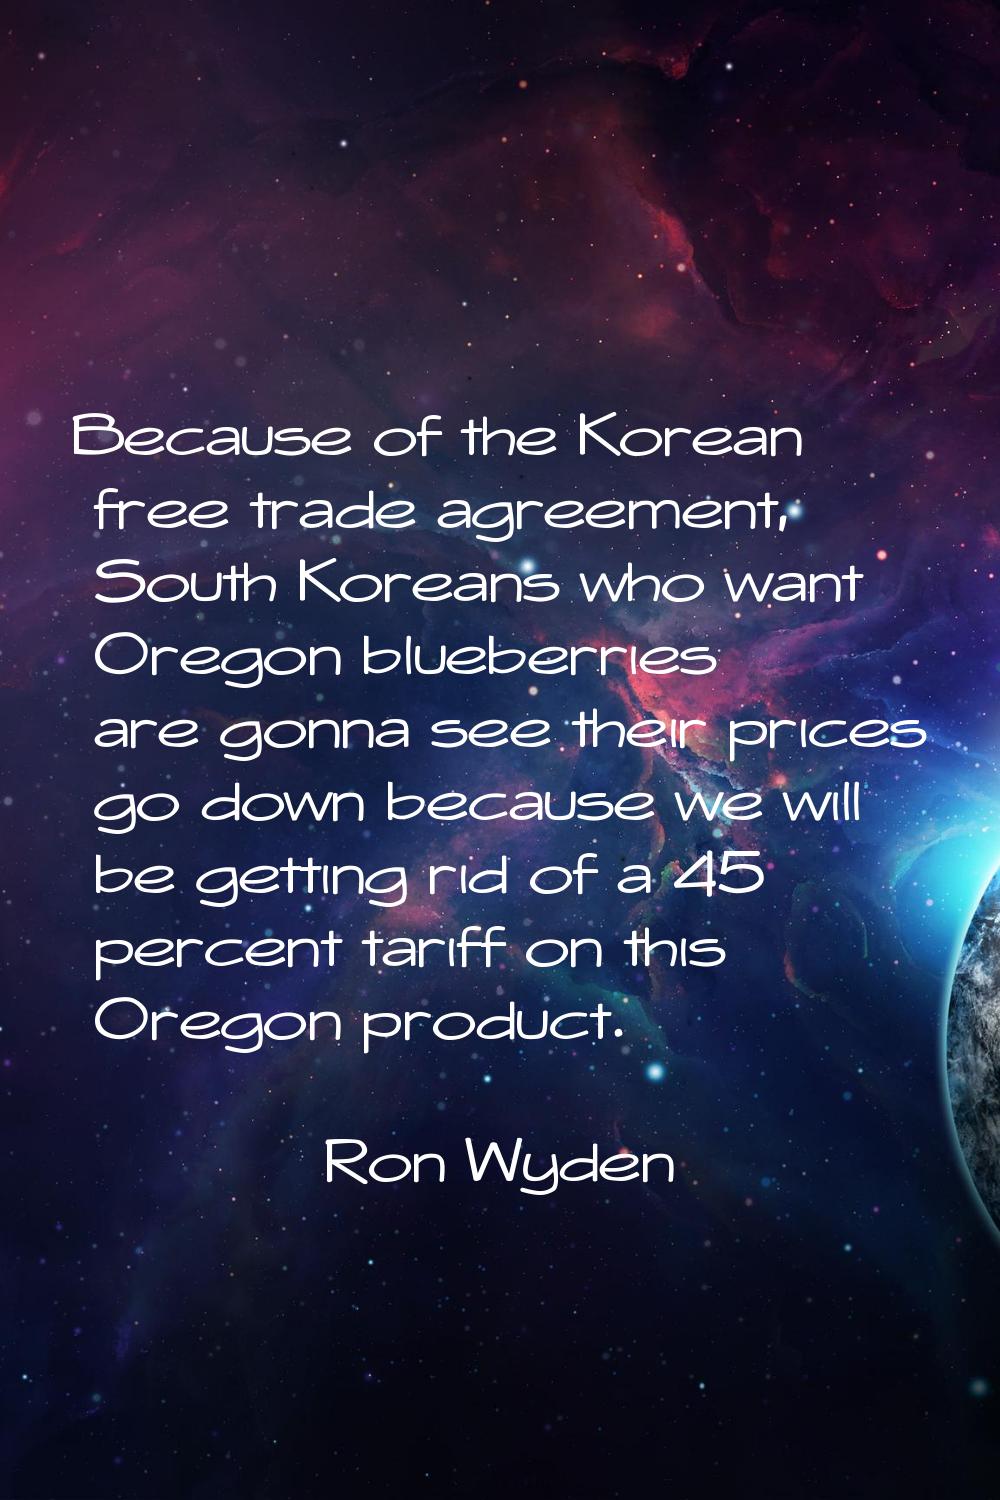 Because of the Korean free trade agreement, South Koreans who want Oregon blueberries are gonna see